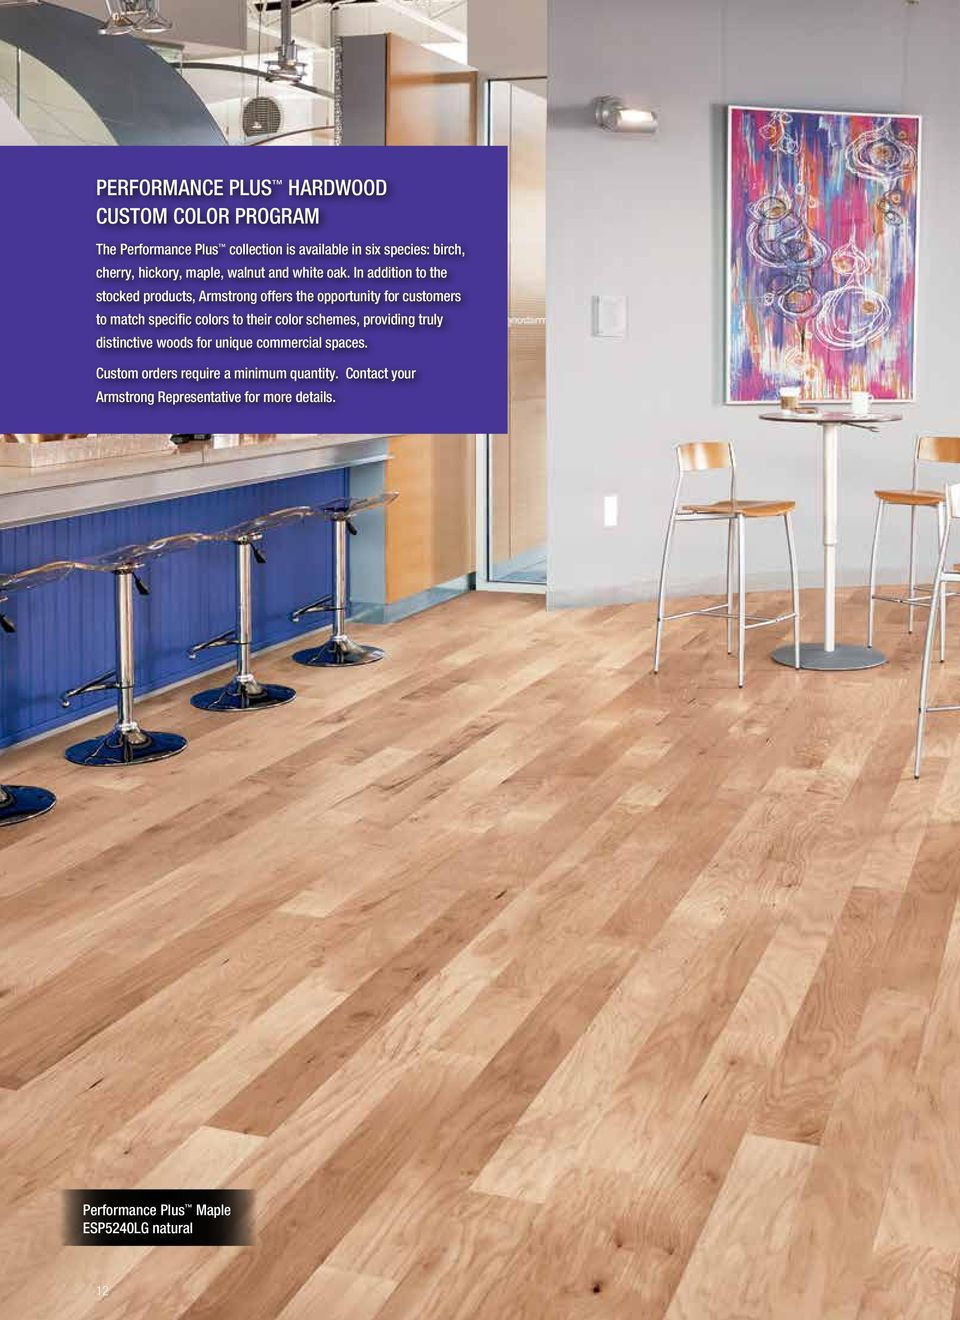 29 Stylish Canadian Birch Hardwood Flooring 2024 free download canadian birch hardwood flooring of performance plus midtown pdf for in addition to the stocked products armstrong offers the opportunity for customers to match specific